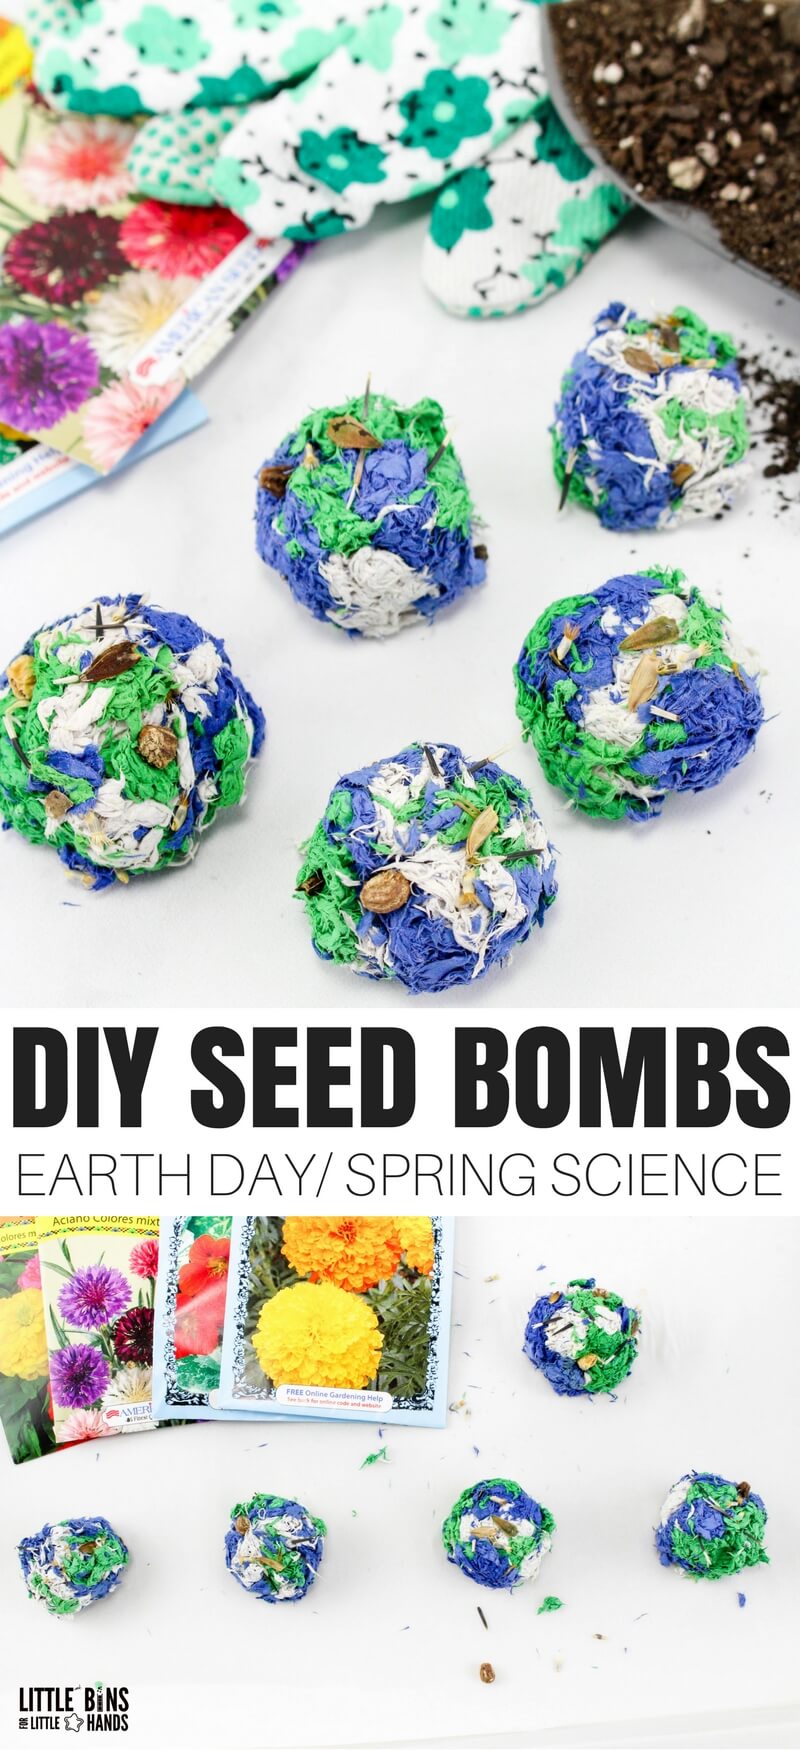 Kick off your spring science with an Earth Day activity and make seed bombs with your kids! Super easy and fun to make, start a new tradition this Earth Day and learn how to make homemade seed bombs. A flower seed bomb is a fun DIY gift! Use this seed bomb recipe and make them for mom for Mother's Day too!